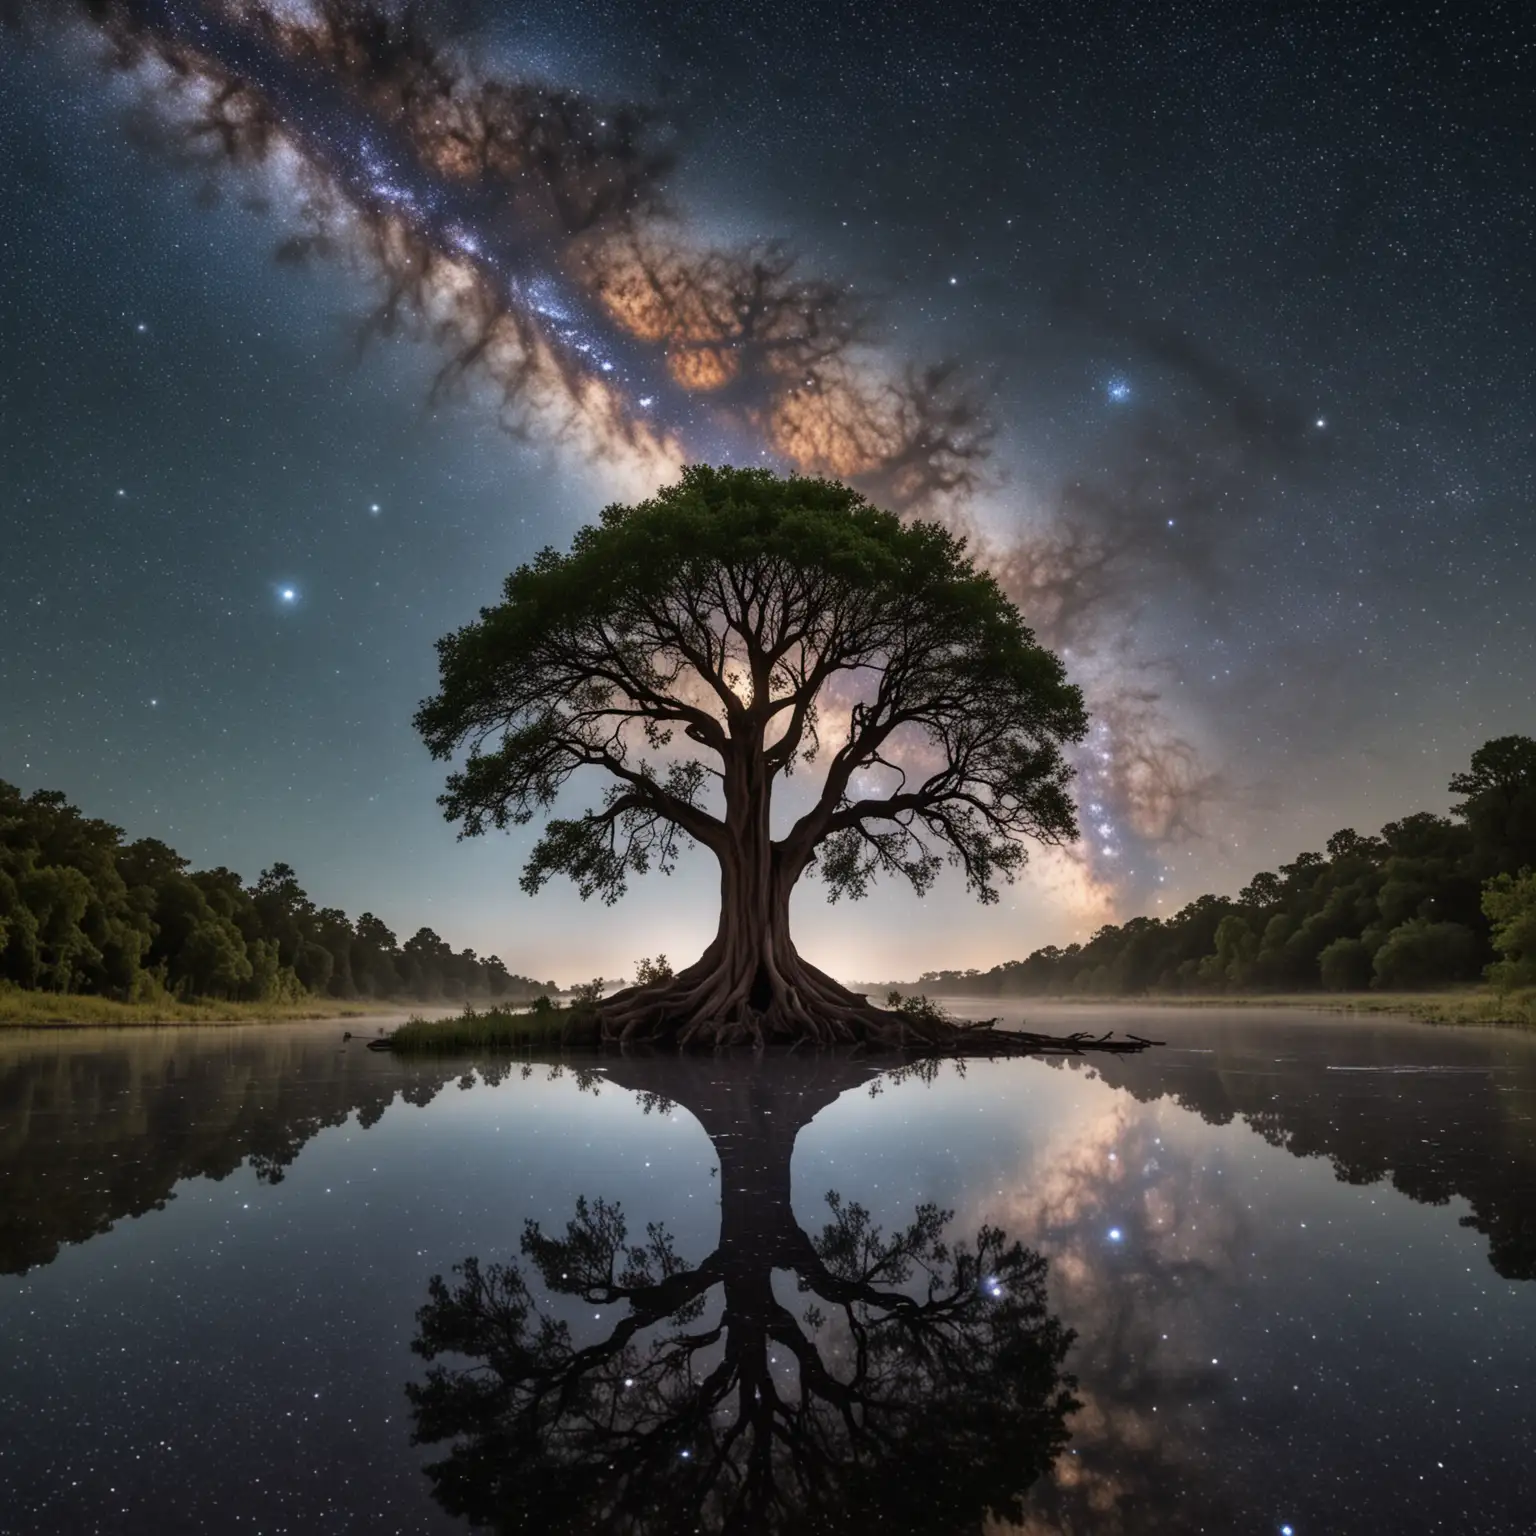 floating river with large tree in the middle with galaxy of stars behind it.